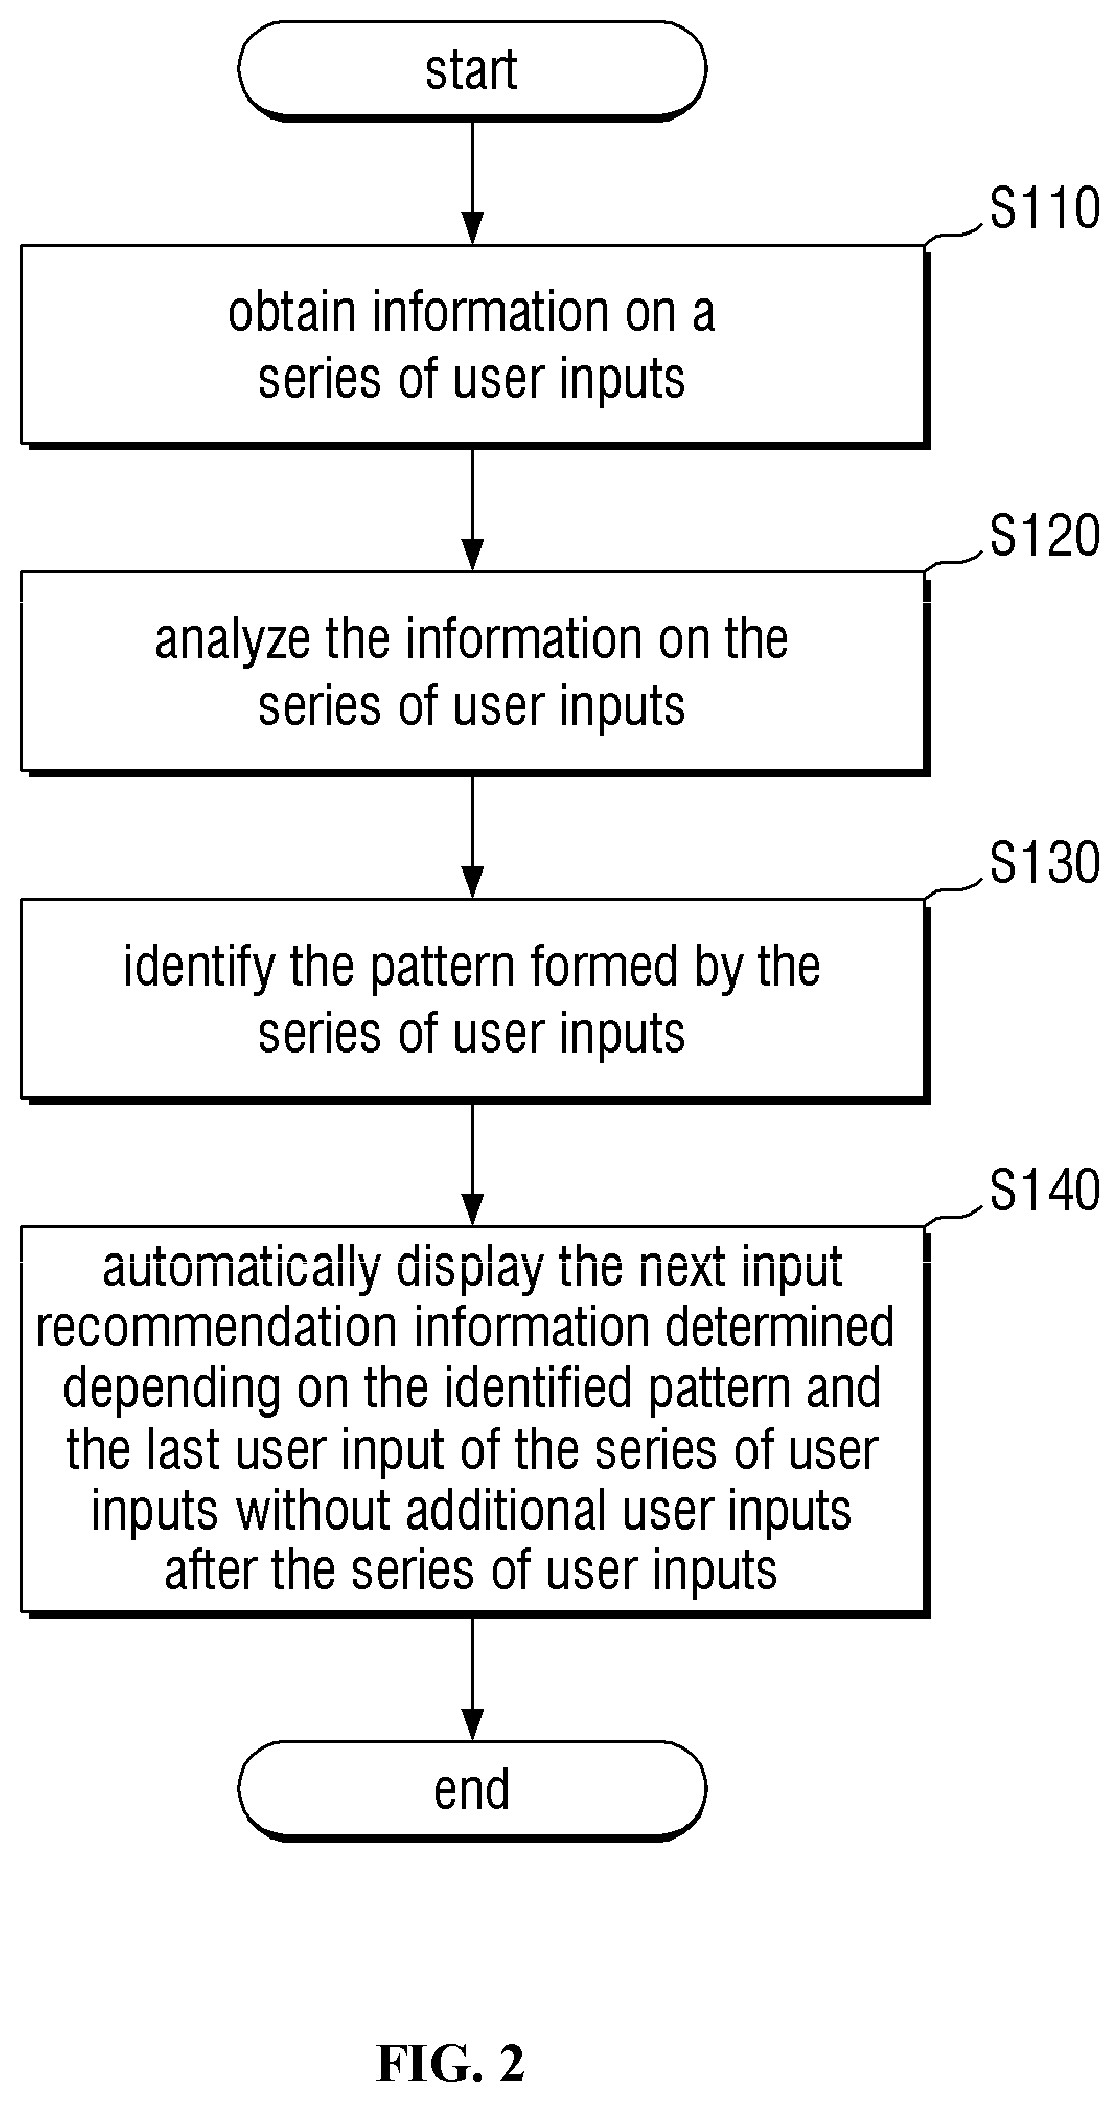 Method for recommending next user input using pattern analysis of user input